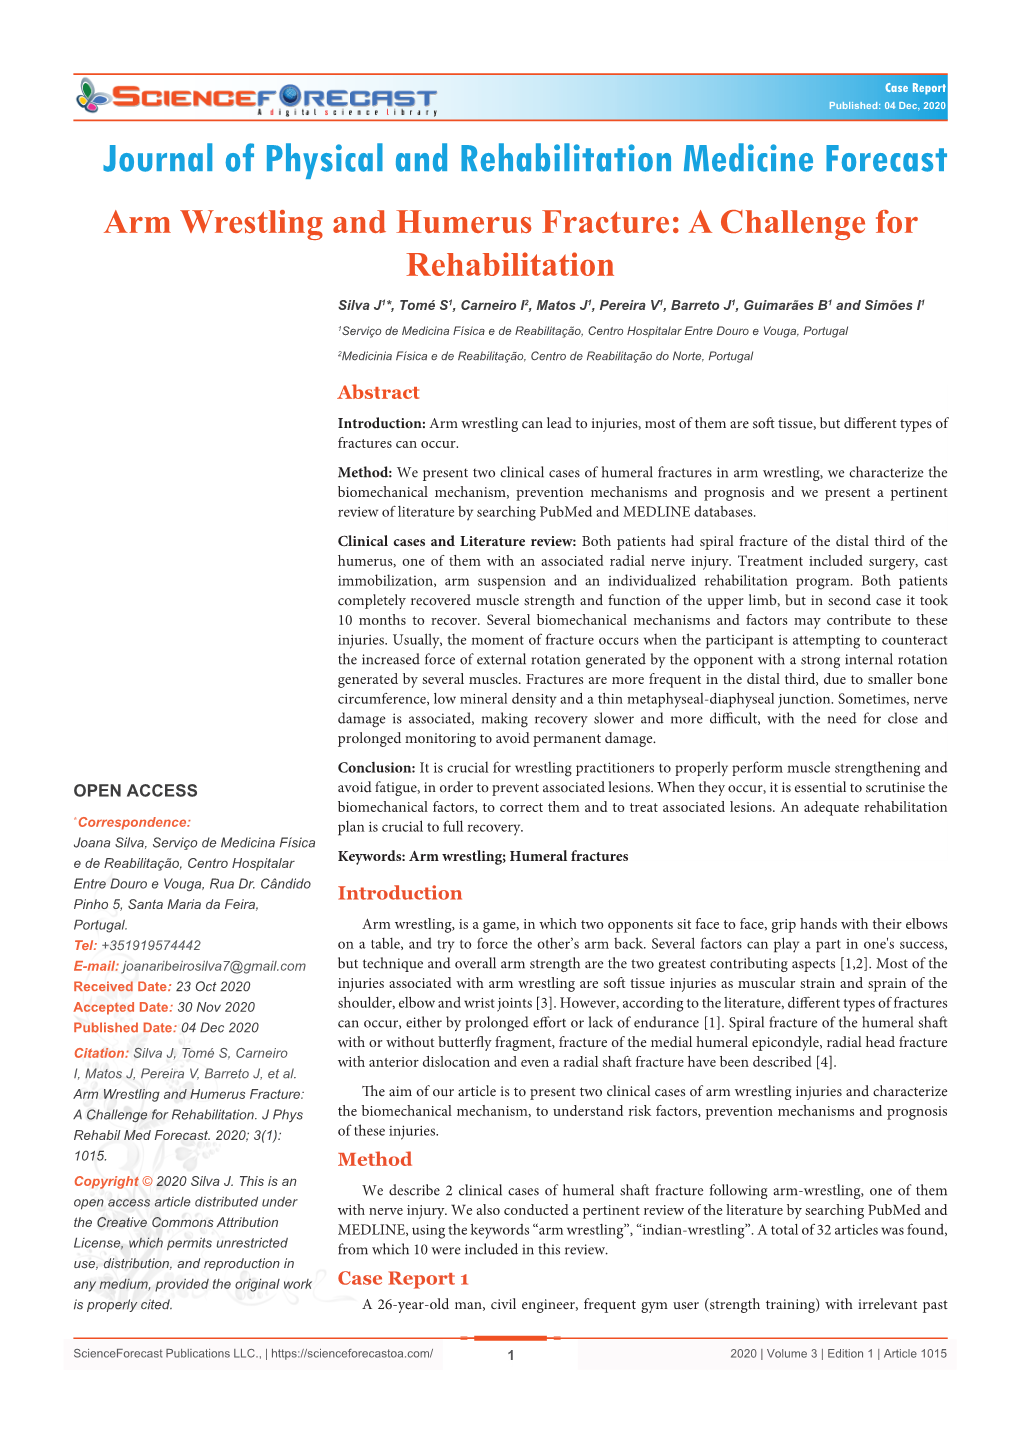 Arm Wrestling and Humerus Fracture: a Challenge for Rehabilitation